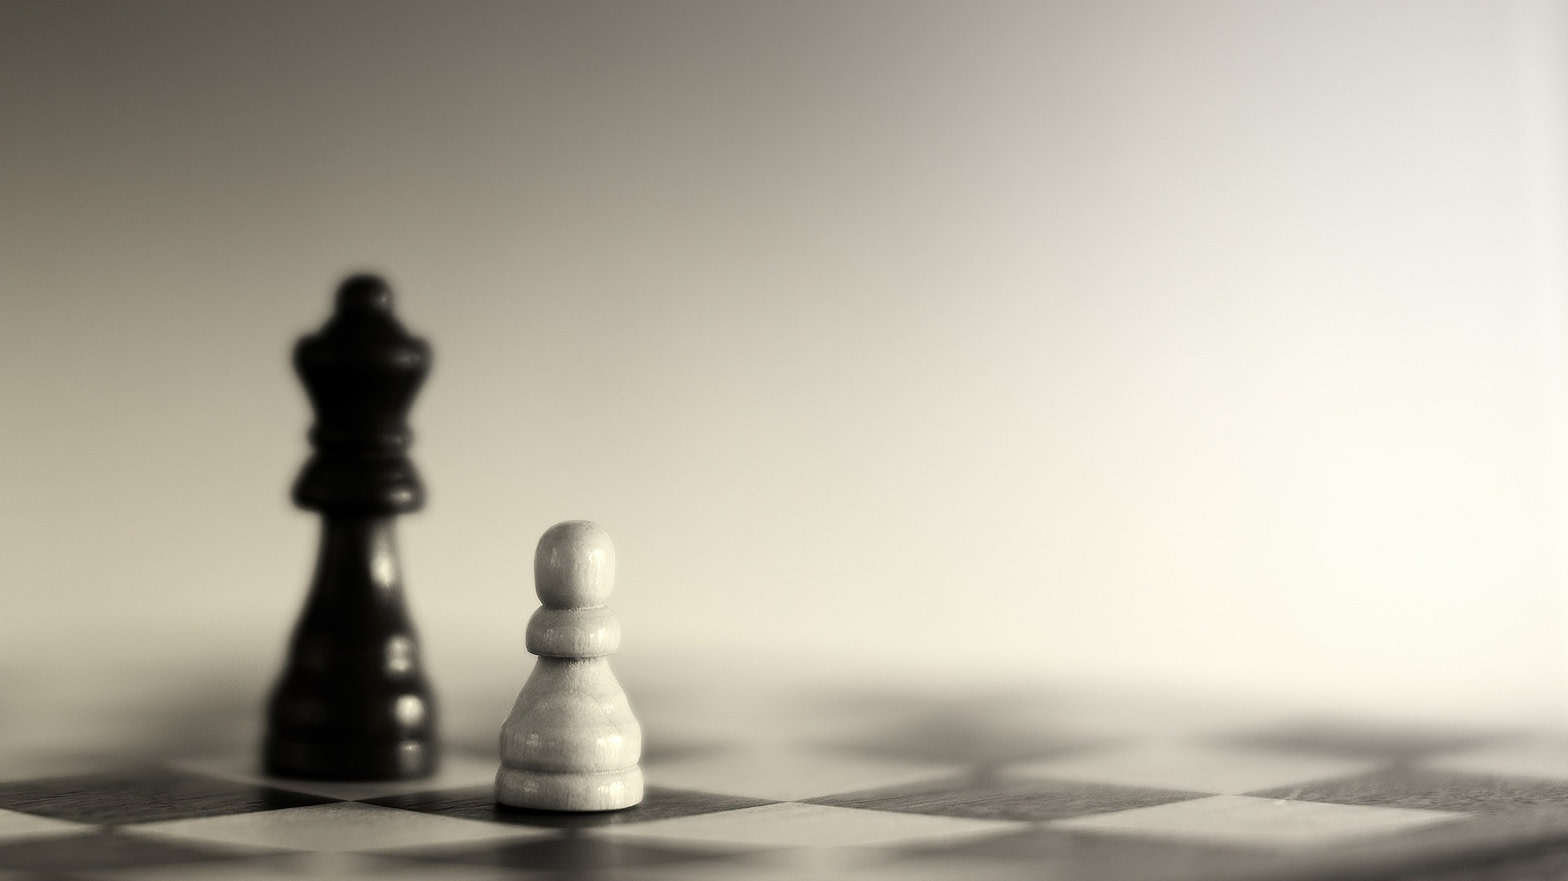 Compound Interest: Are You Playing Checkers or Chess?